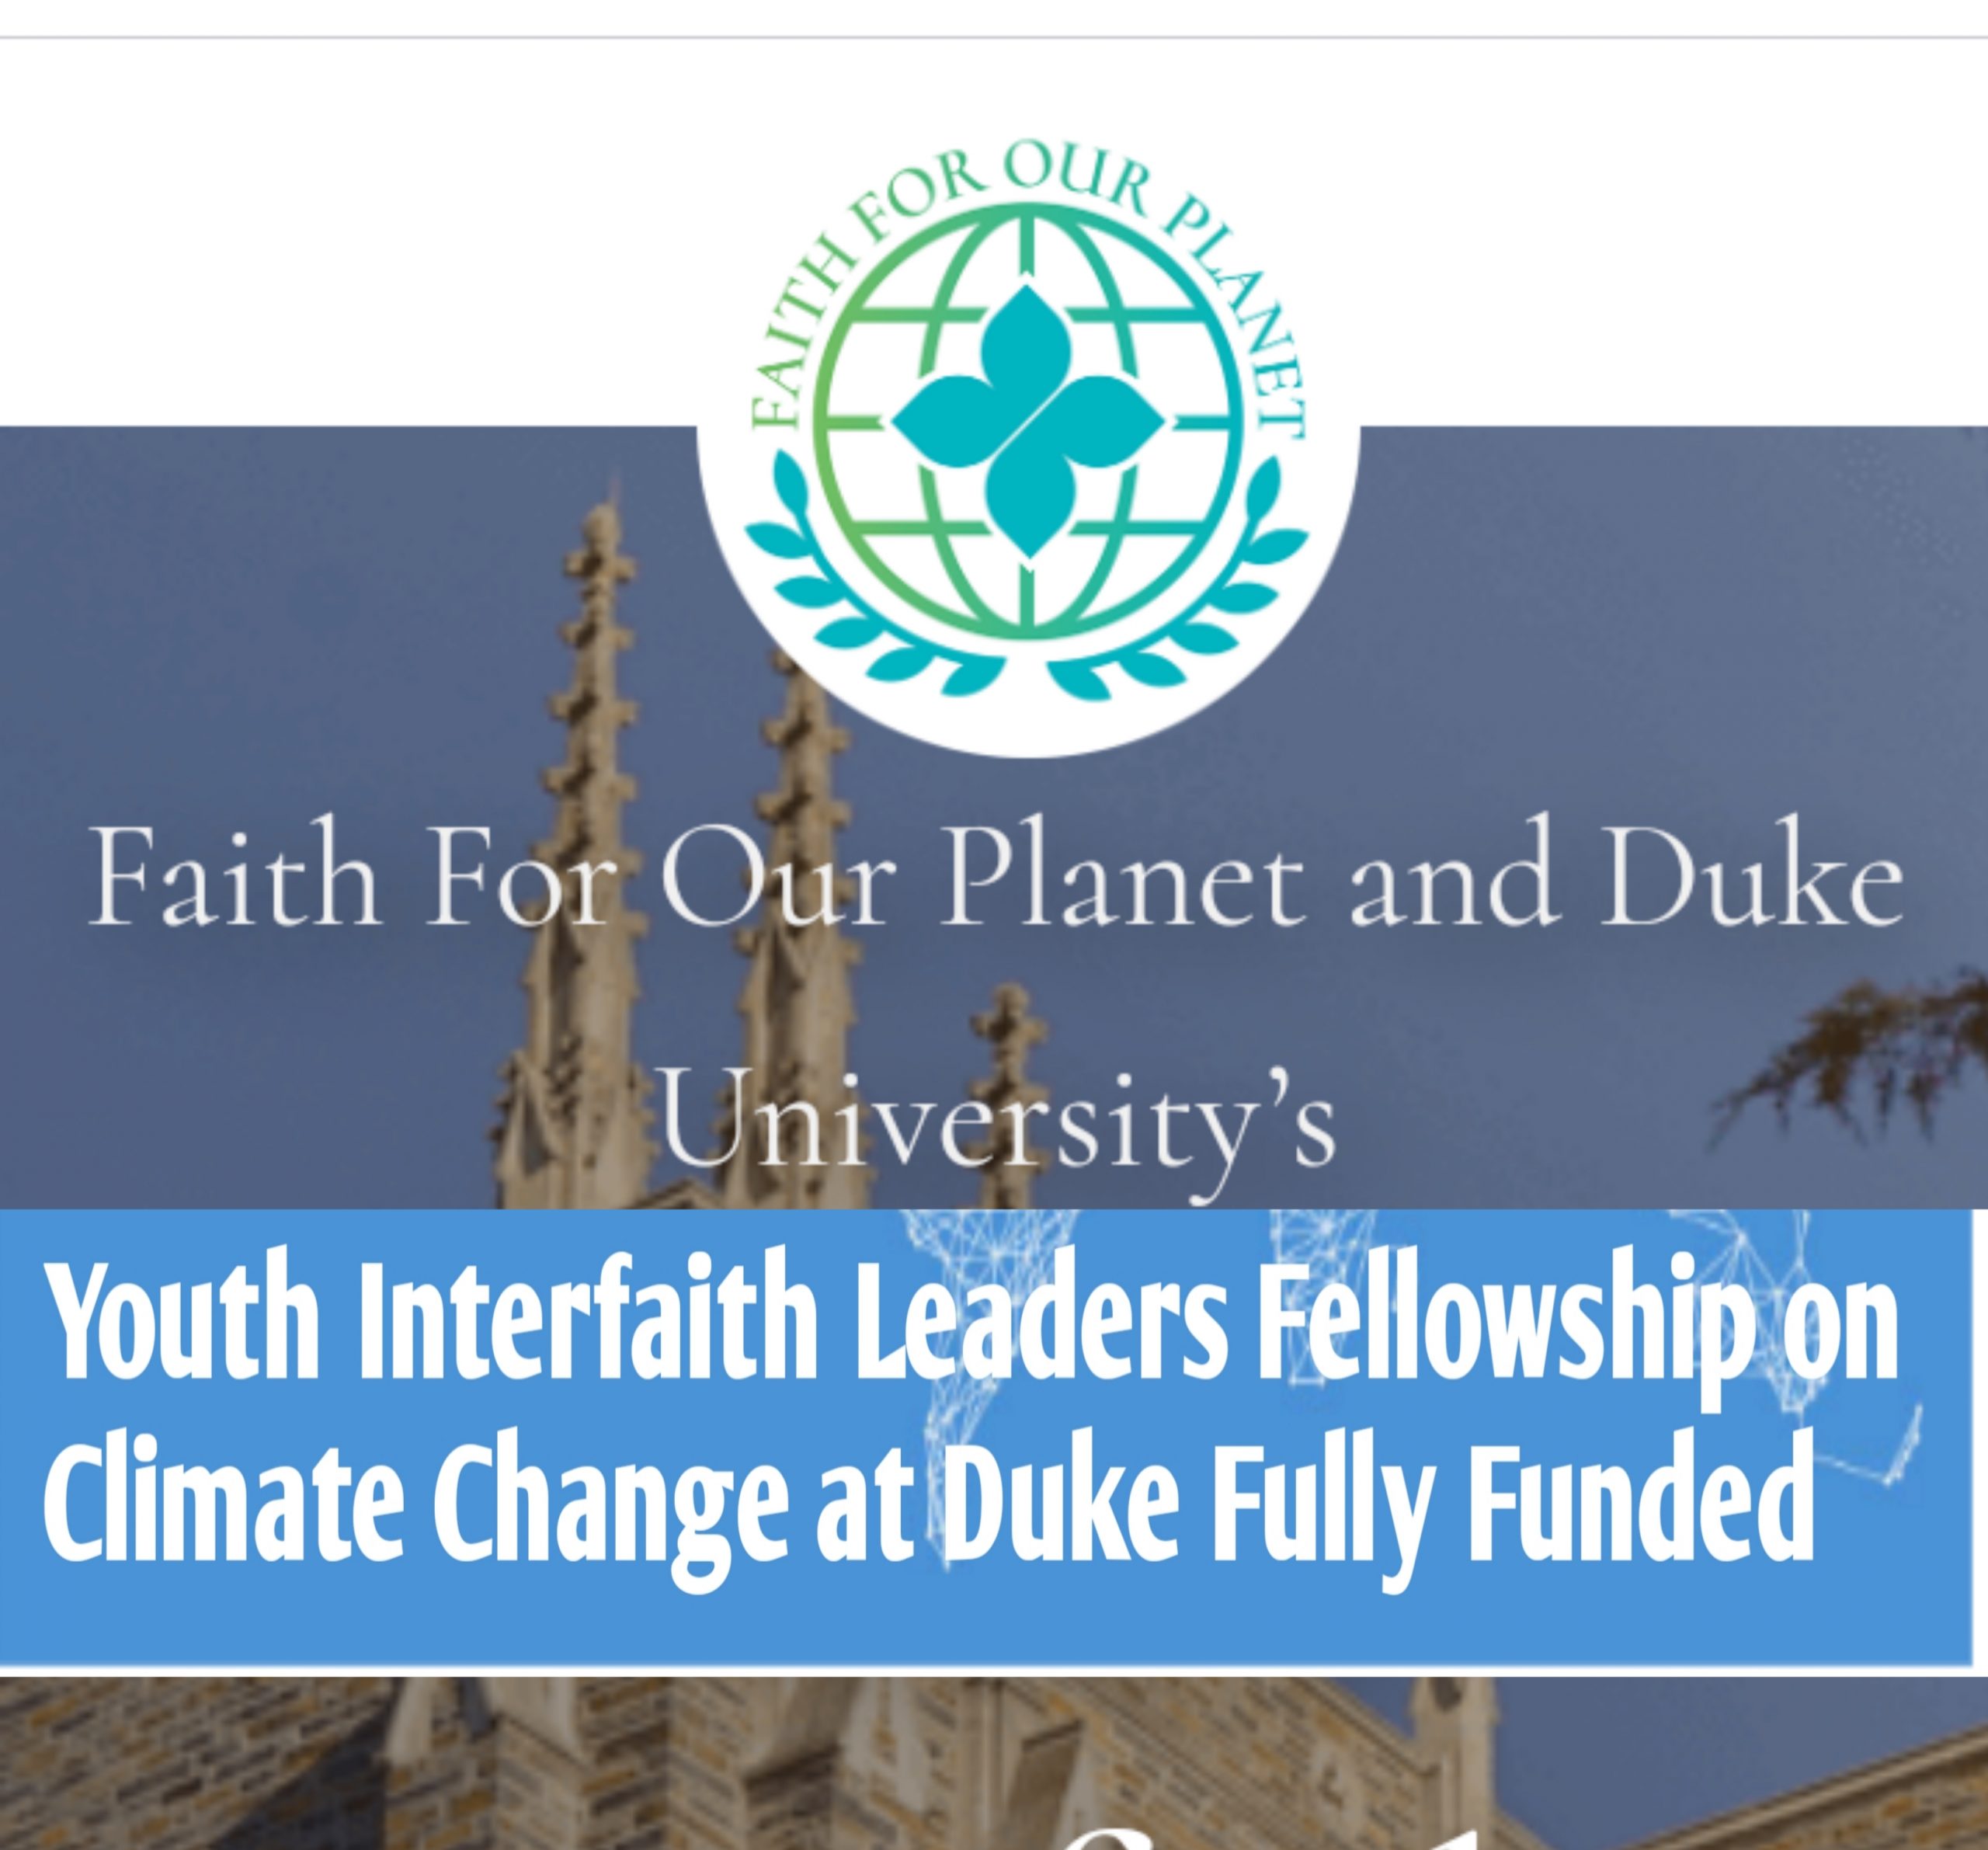 20221009 150351 scaled - Youth Interfaith Leaders Fully Funded Fellowship on Climate Change at Duke